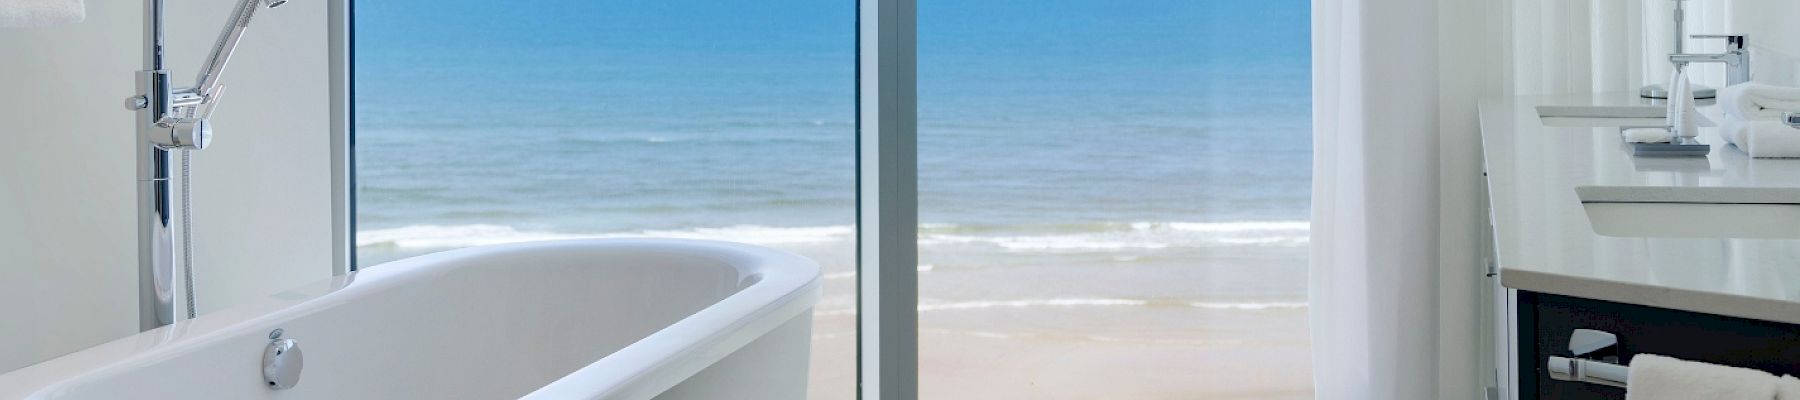 A bathroom with a freestanding tub and a large window overlooking the ocean. Text reads 